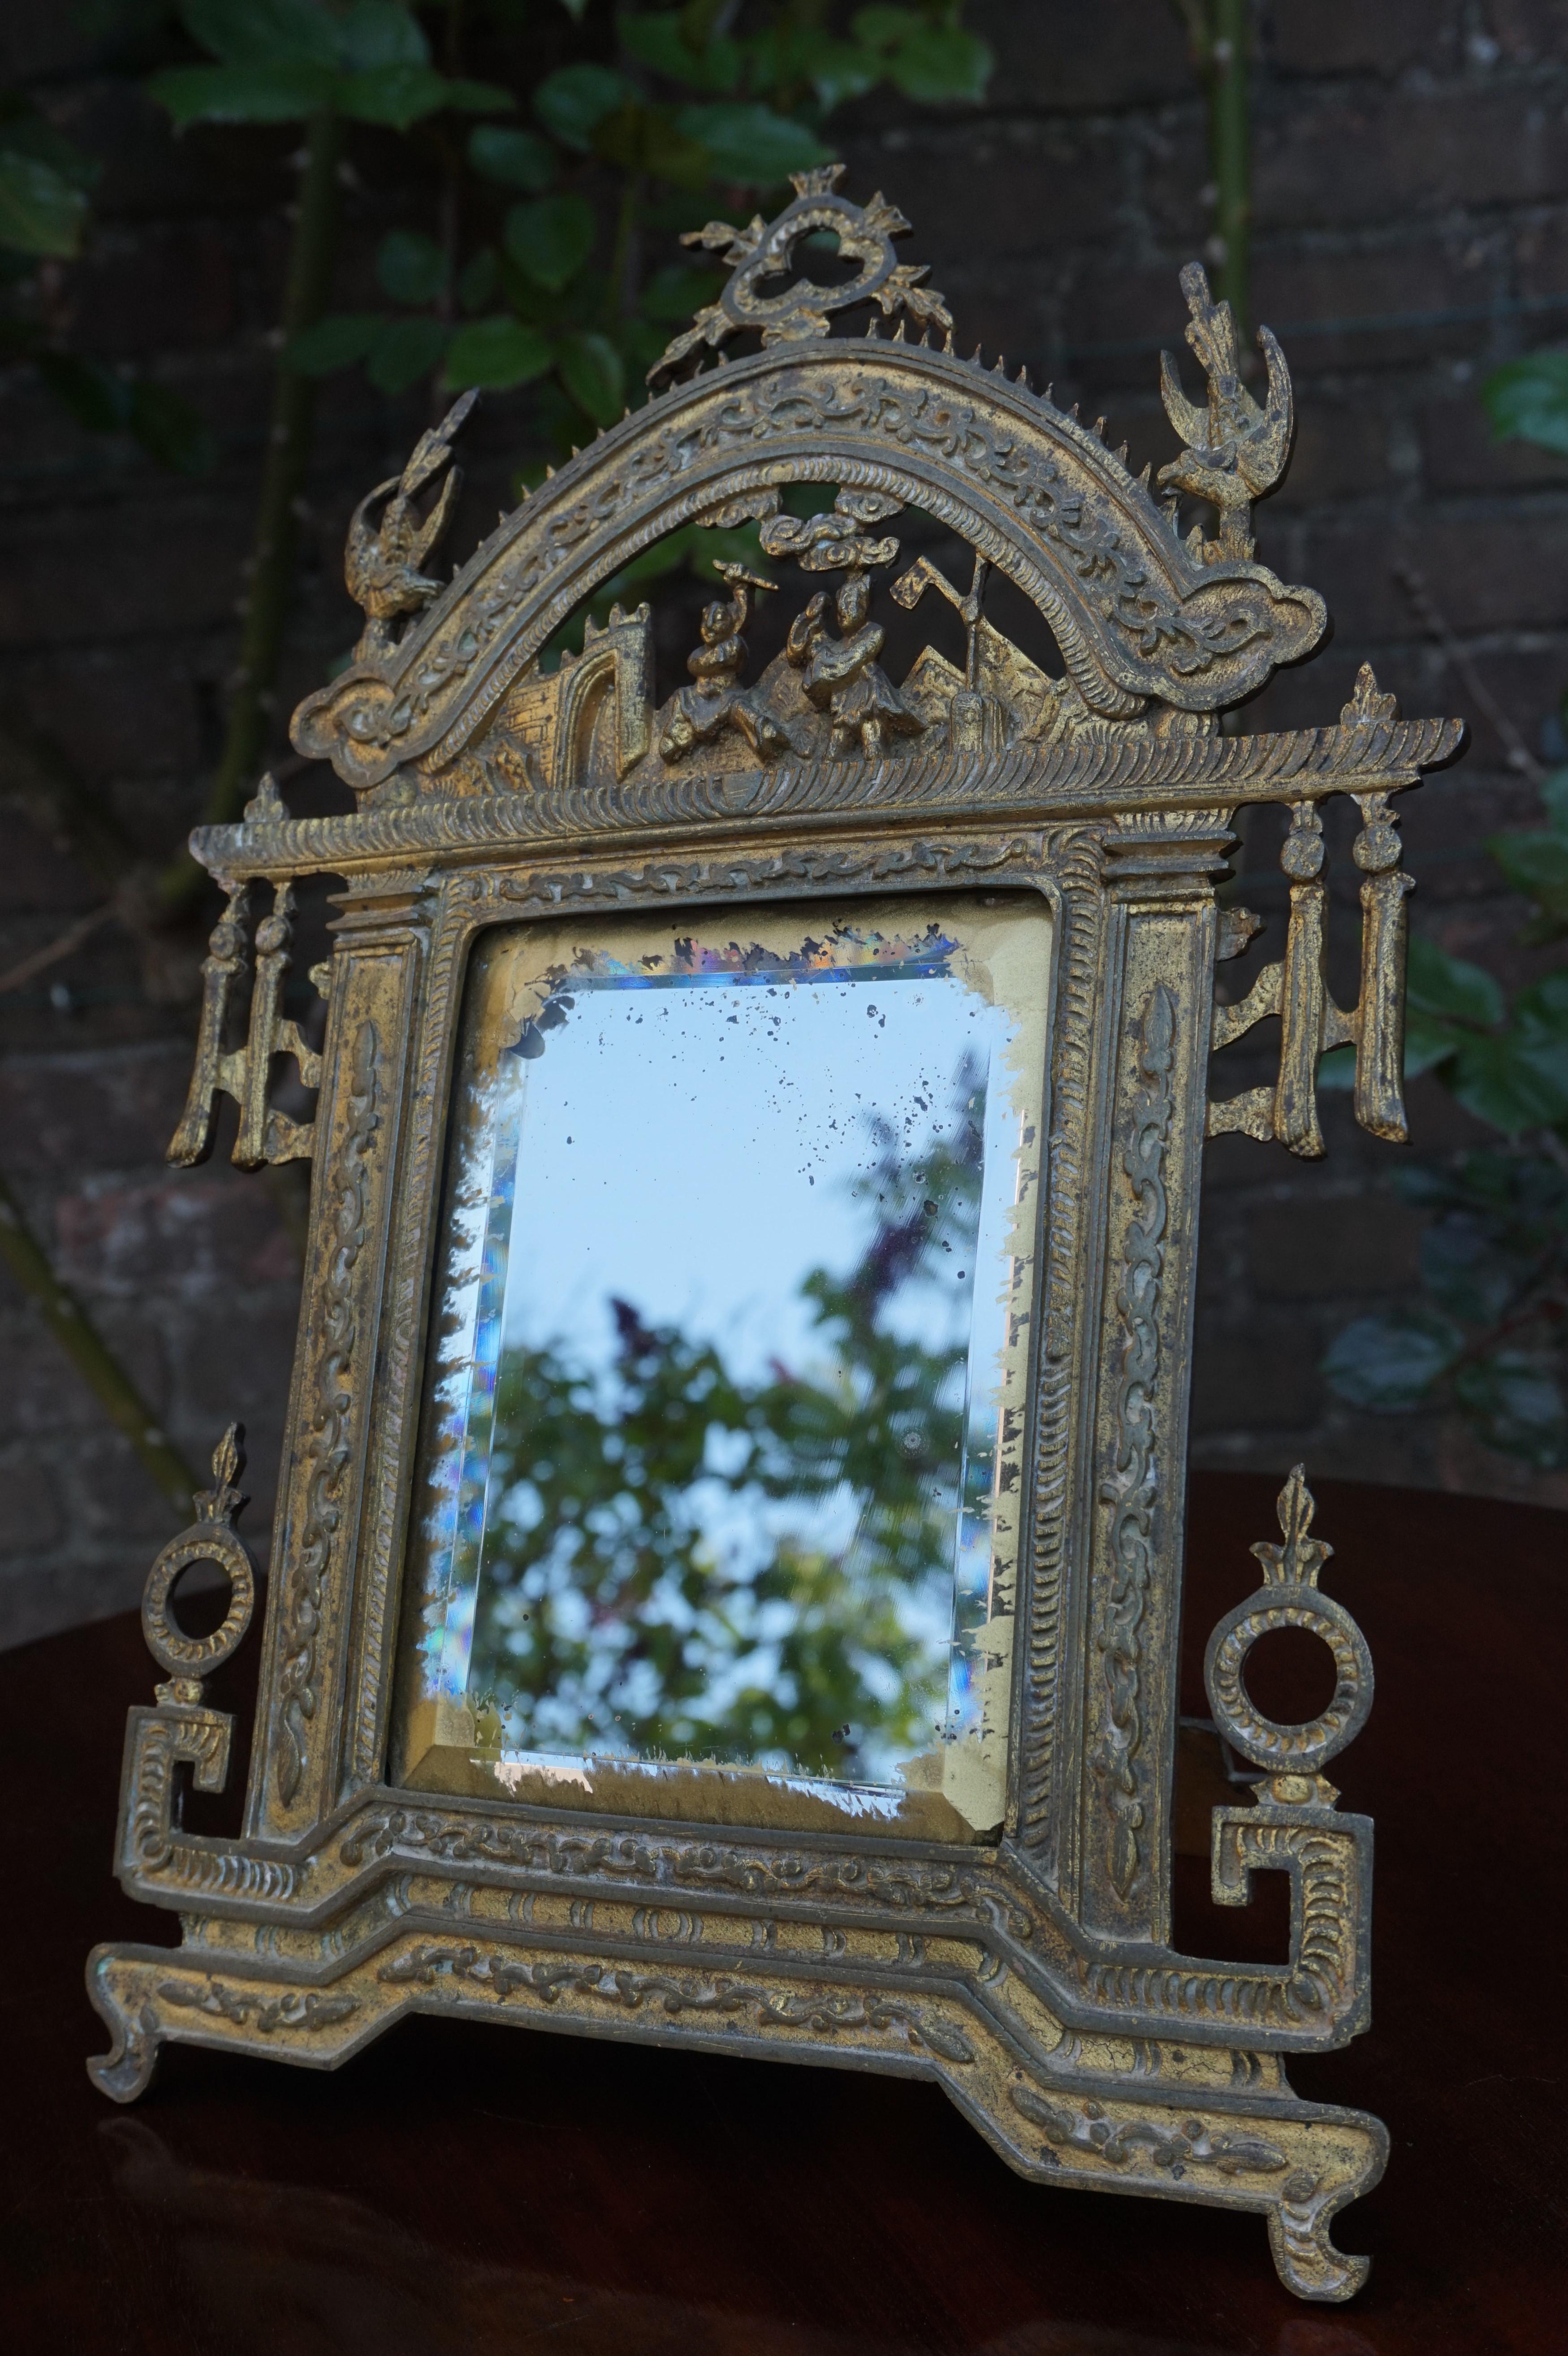 Late 19th or Early 20th Century Chinese or Chinoiserie Gilt Ormolu Table Mirror For Sale 12